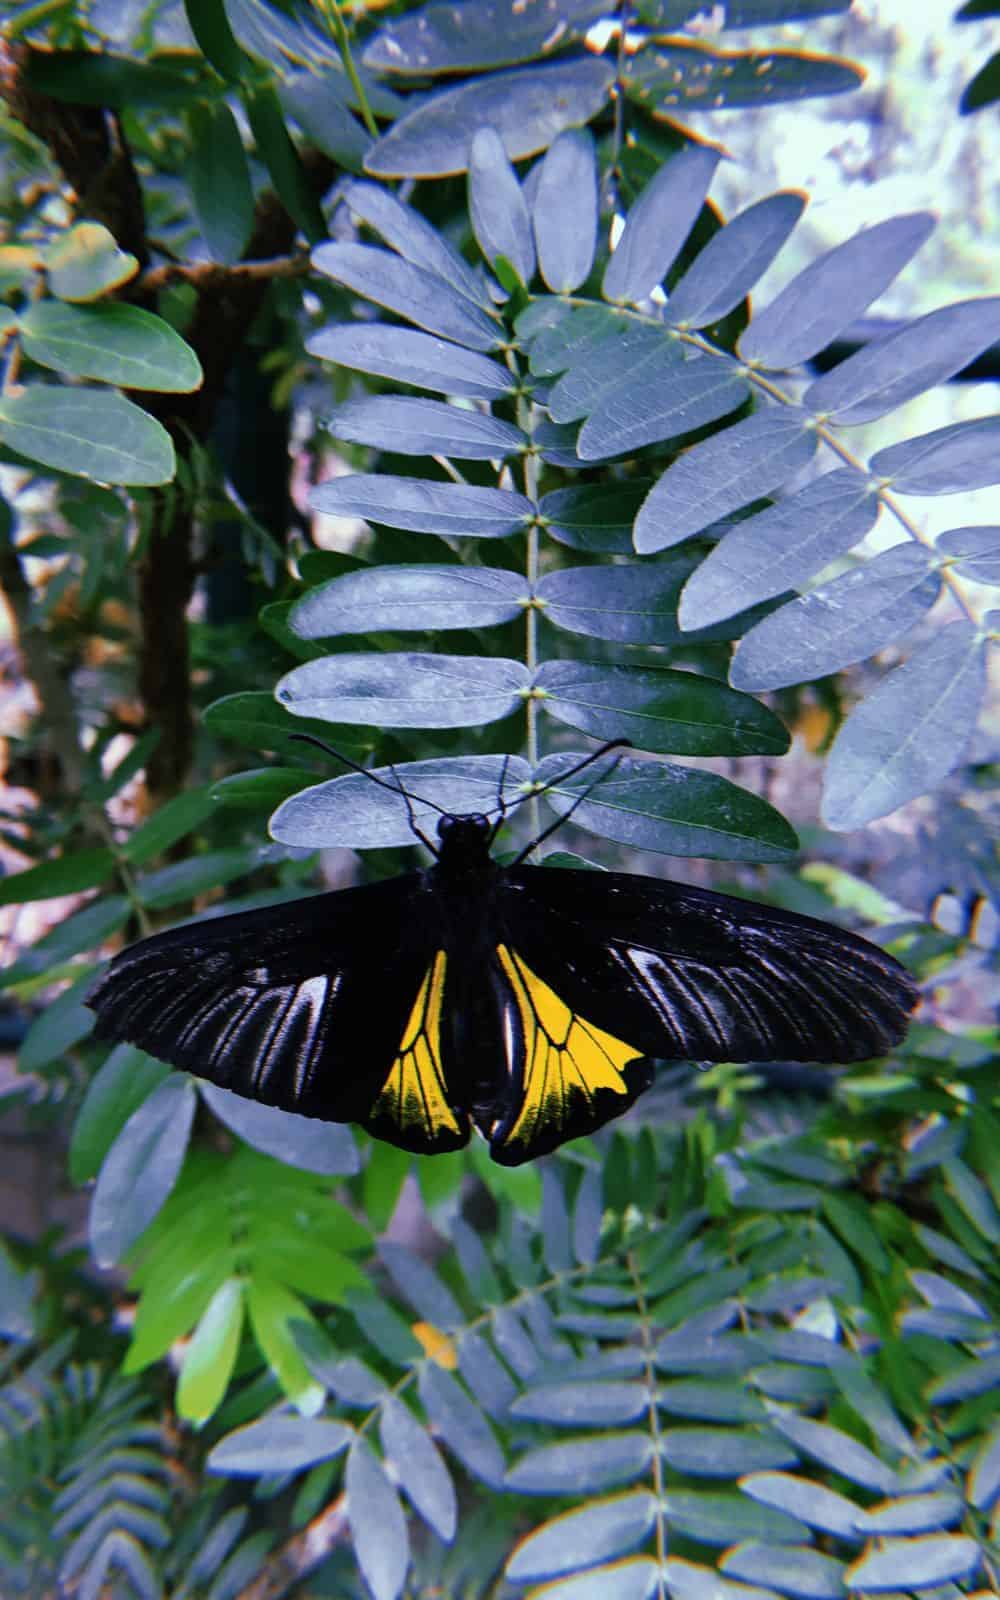 What does a yellow and black butterfly symbolize